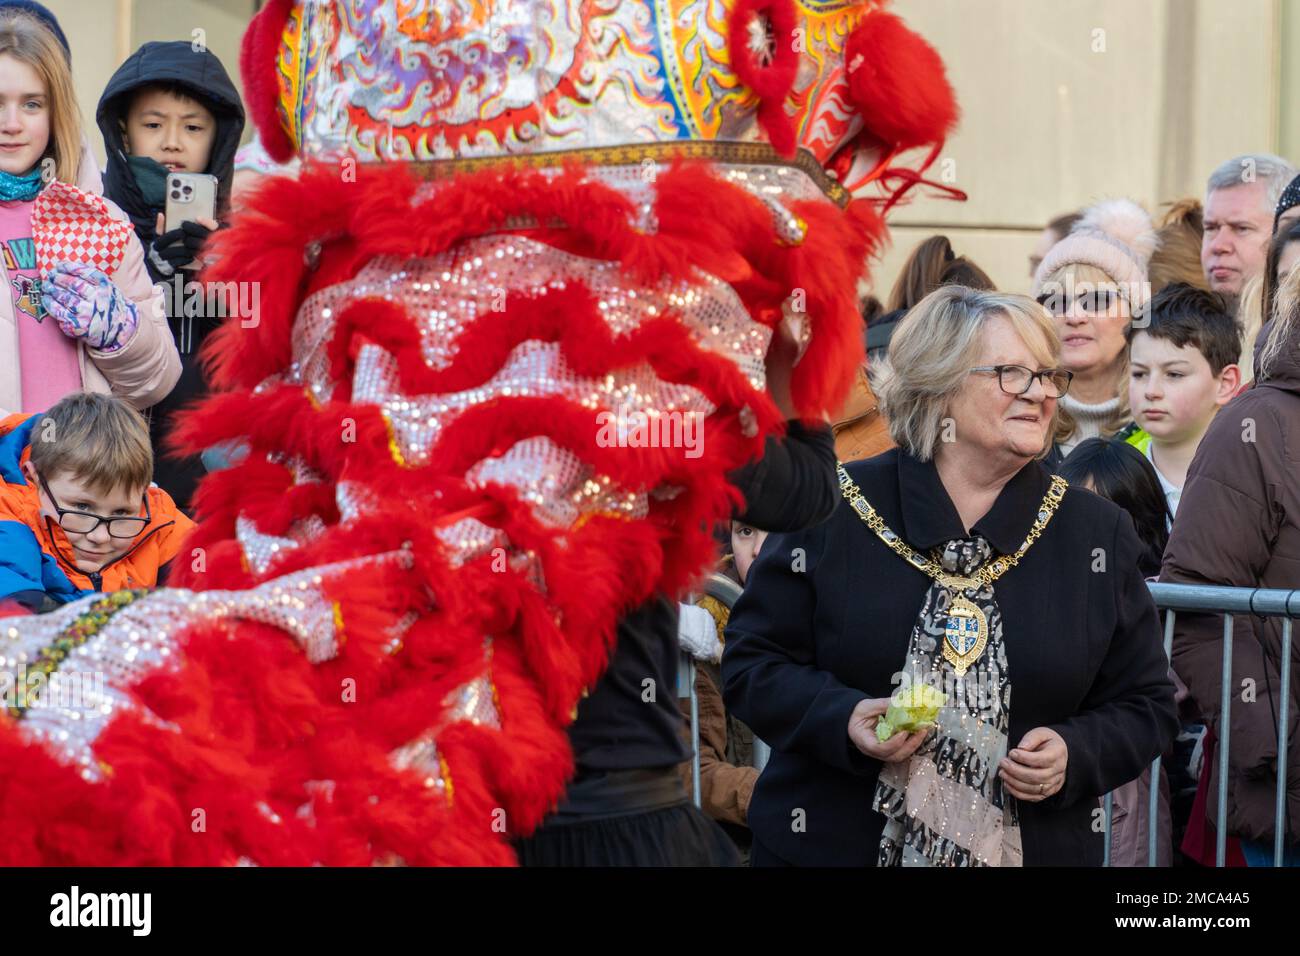 Durham, County Durham, UK. January 21st, 2023. Lunar New Year celebrations in the Year of the Rabbit. People gathered in the city centre to watch performances , including a traditional Chinese lion dance. The Durham County Council Chairman, Councillor Beaty Bainbridge was present, carrying out ceremonial duties. Credit: Hazel Plater/Alamy Live News Stock Photo